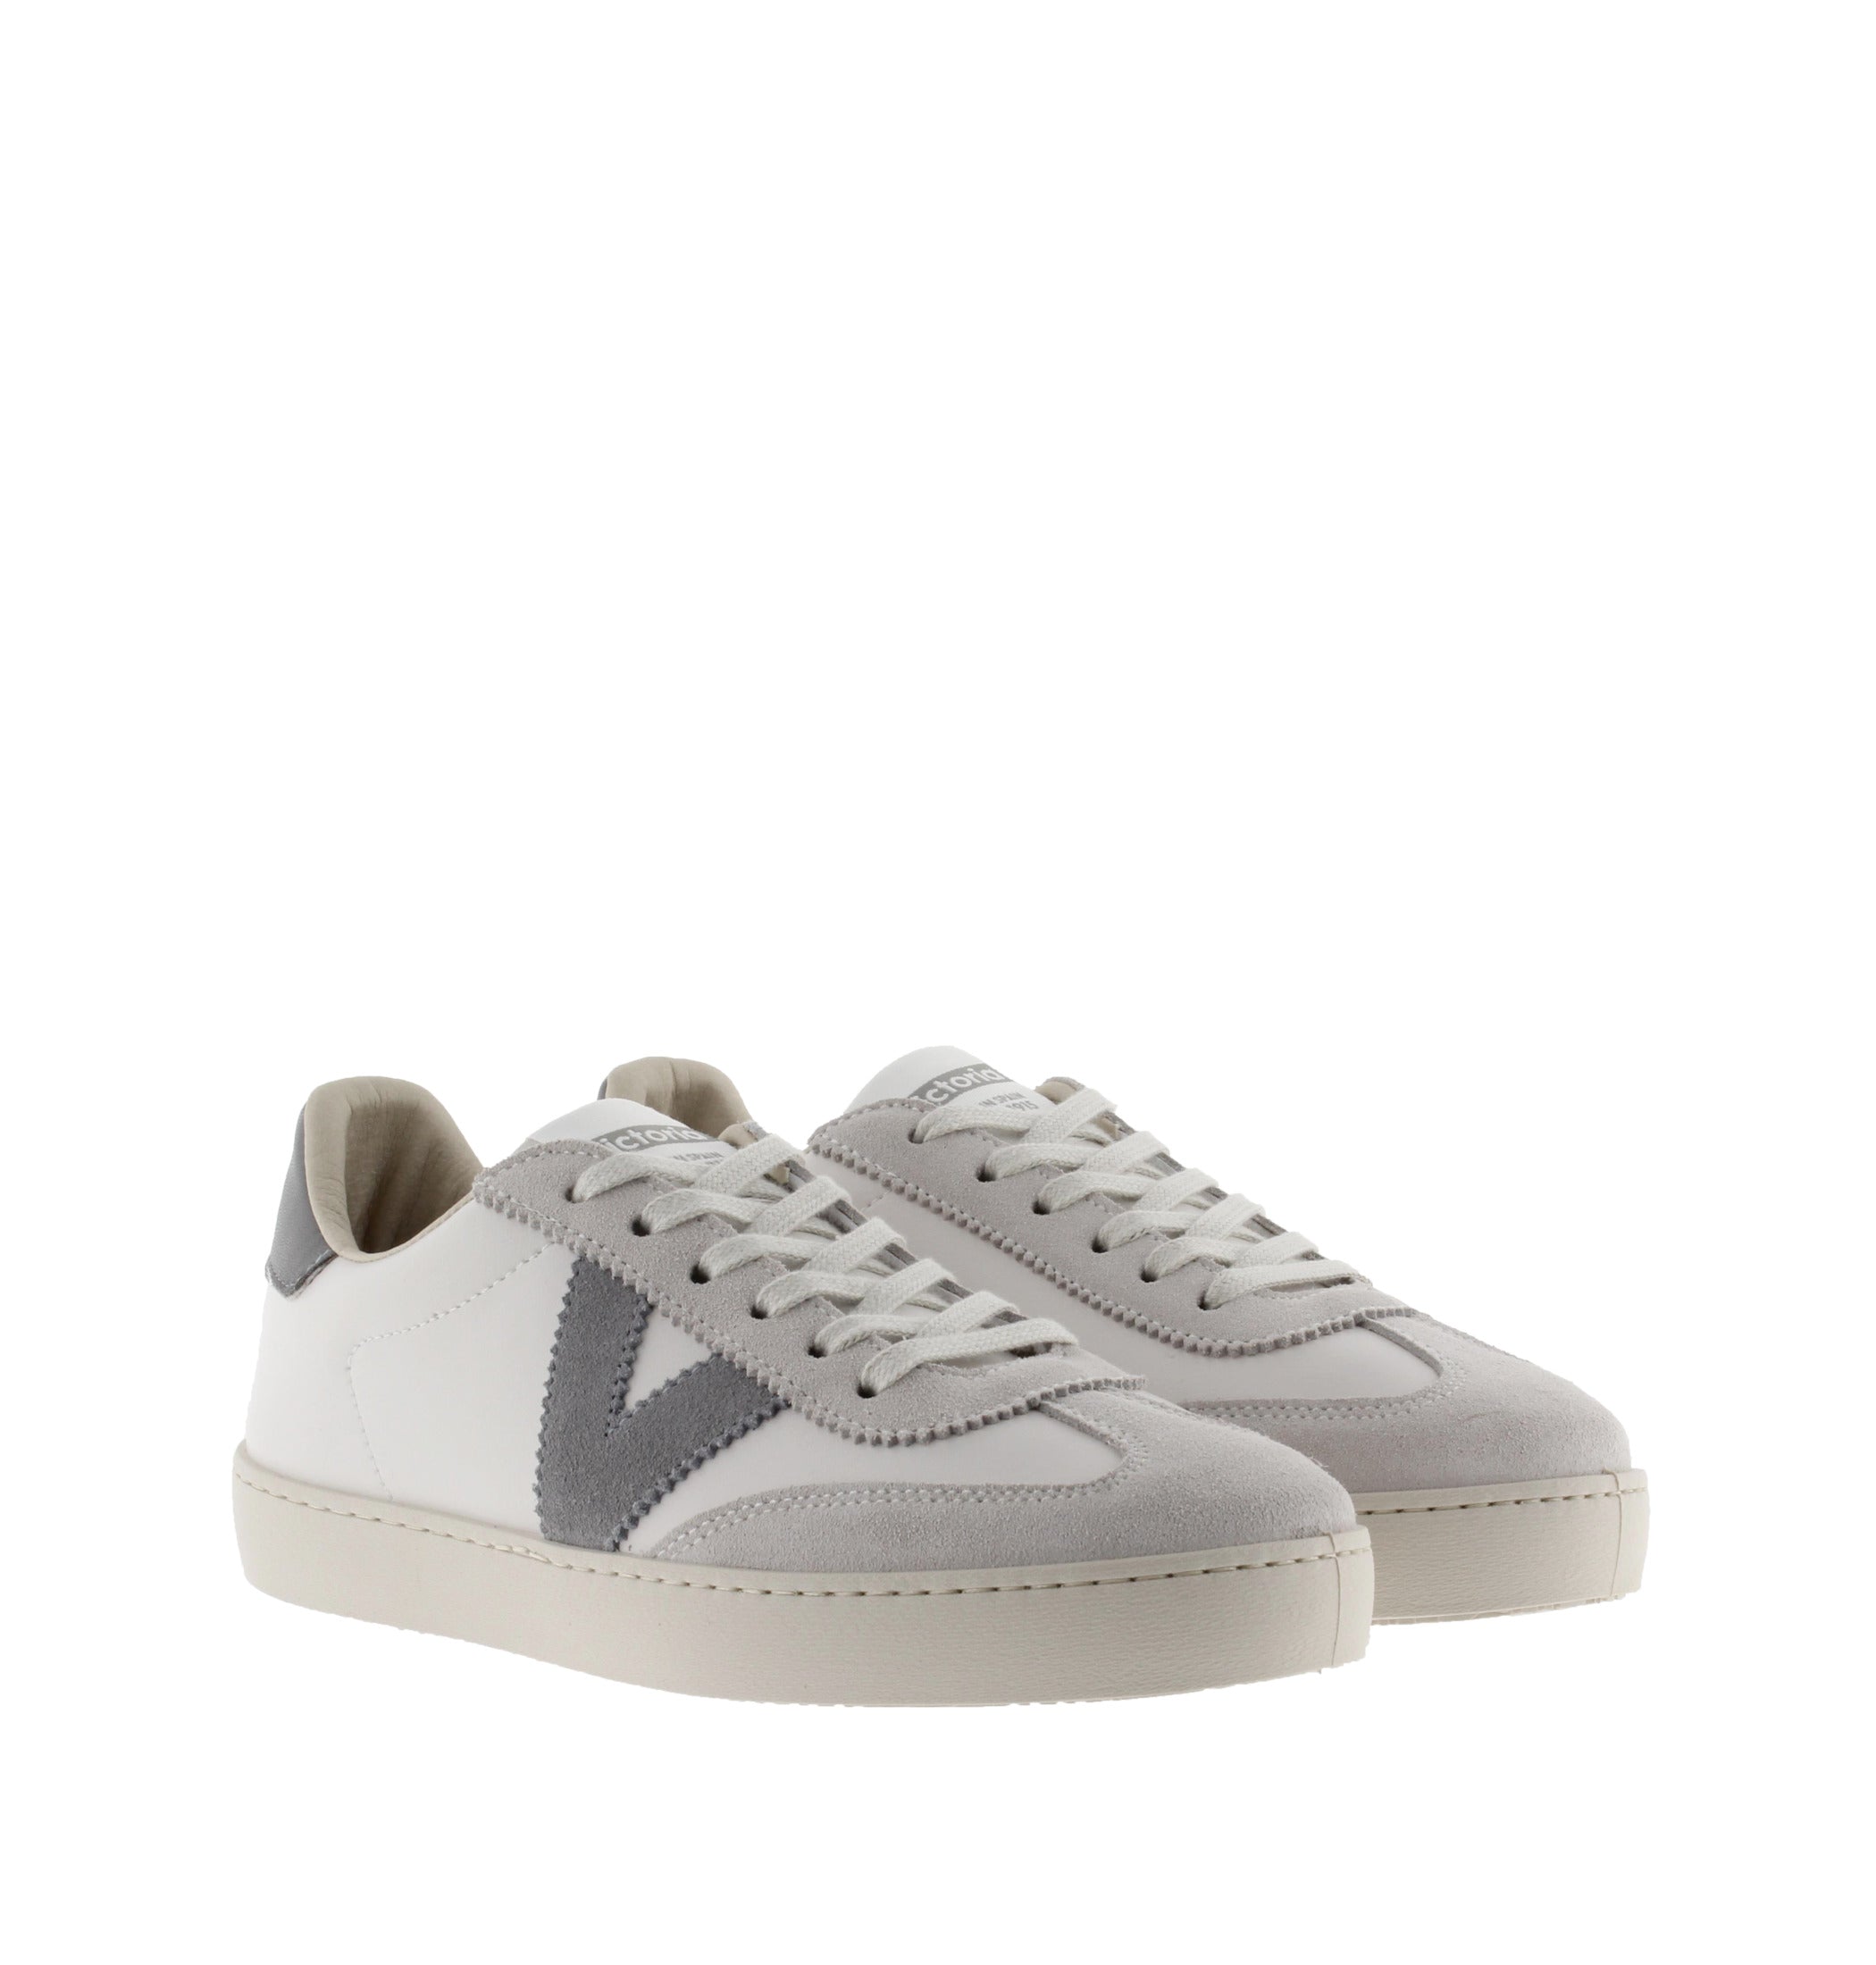 Victoria 1126184 Berlin Ladies Spanish Grey Leather Lace Up Trainers